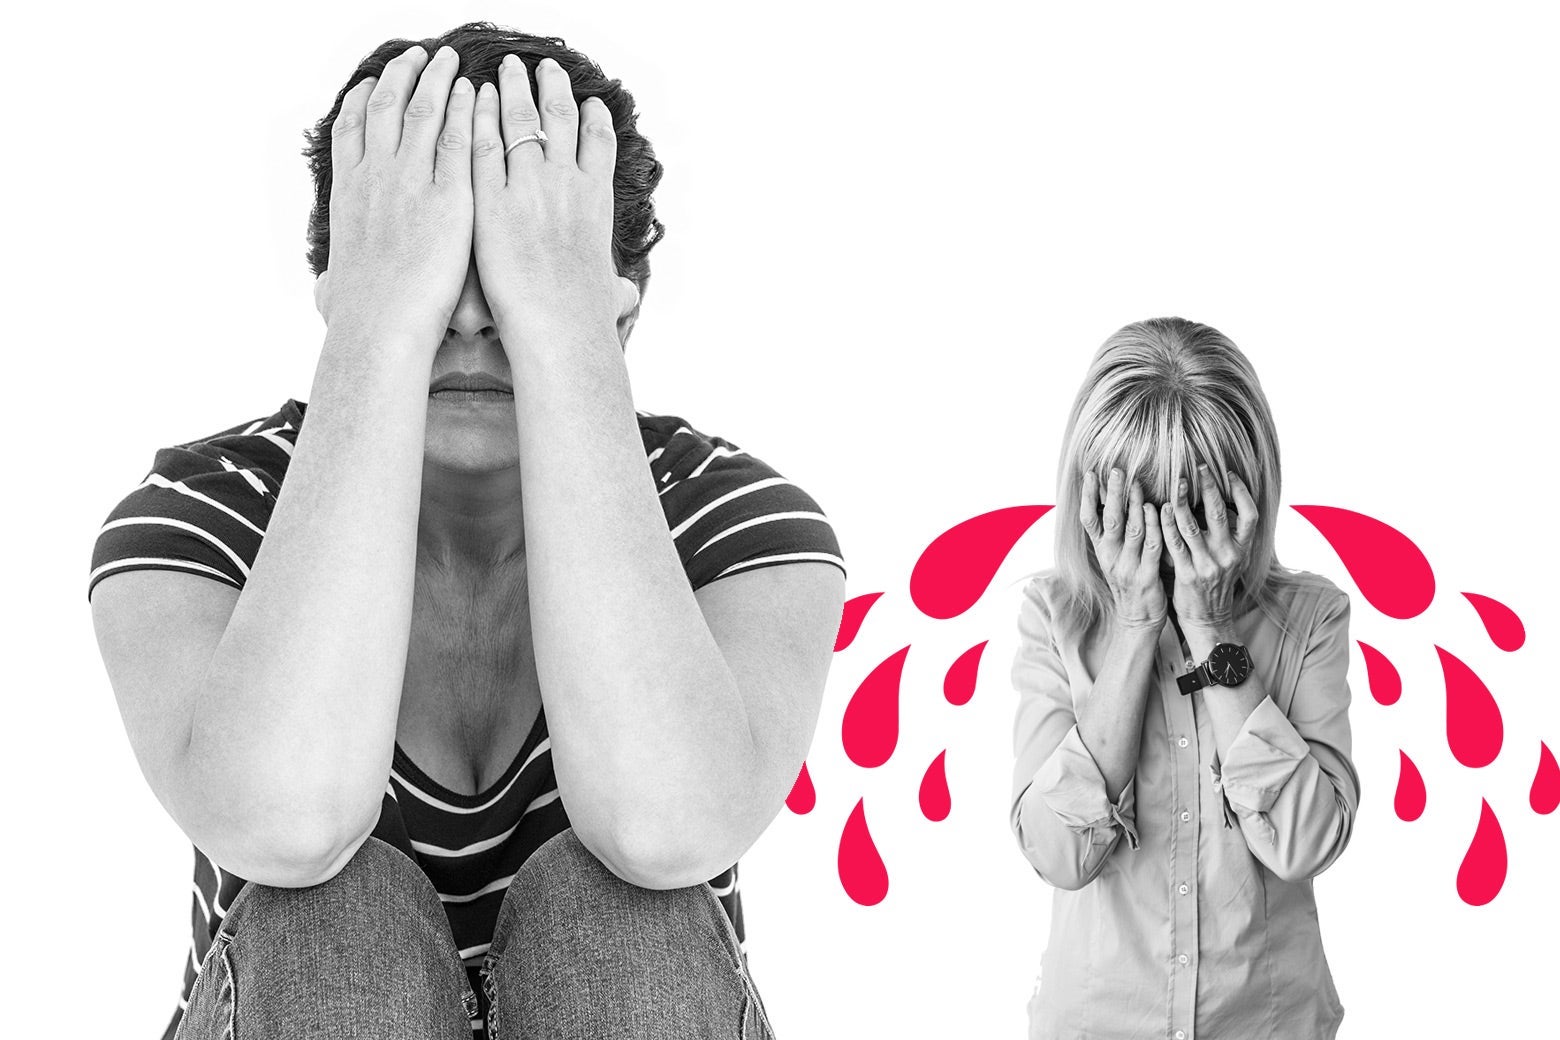 One woman covers her face in exasperation next to another woman covering her face and surrounded by teardrop graphics